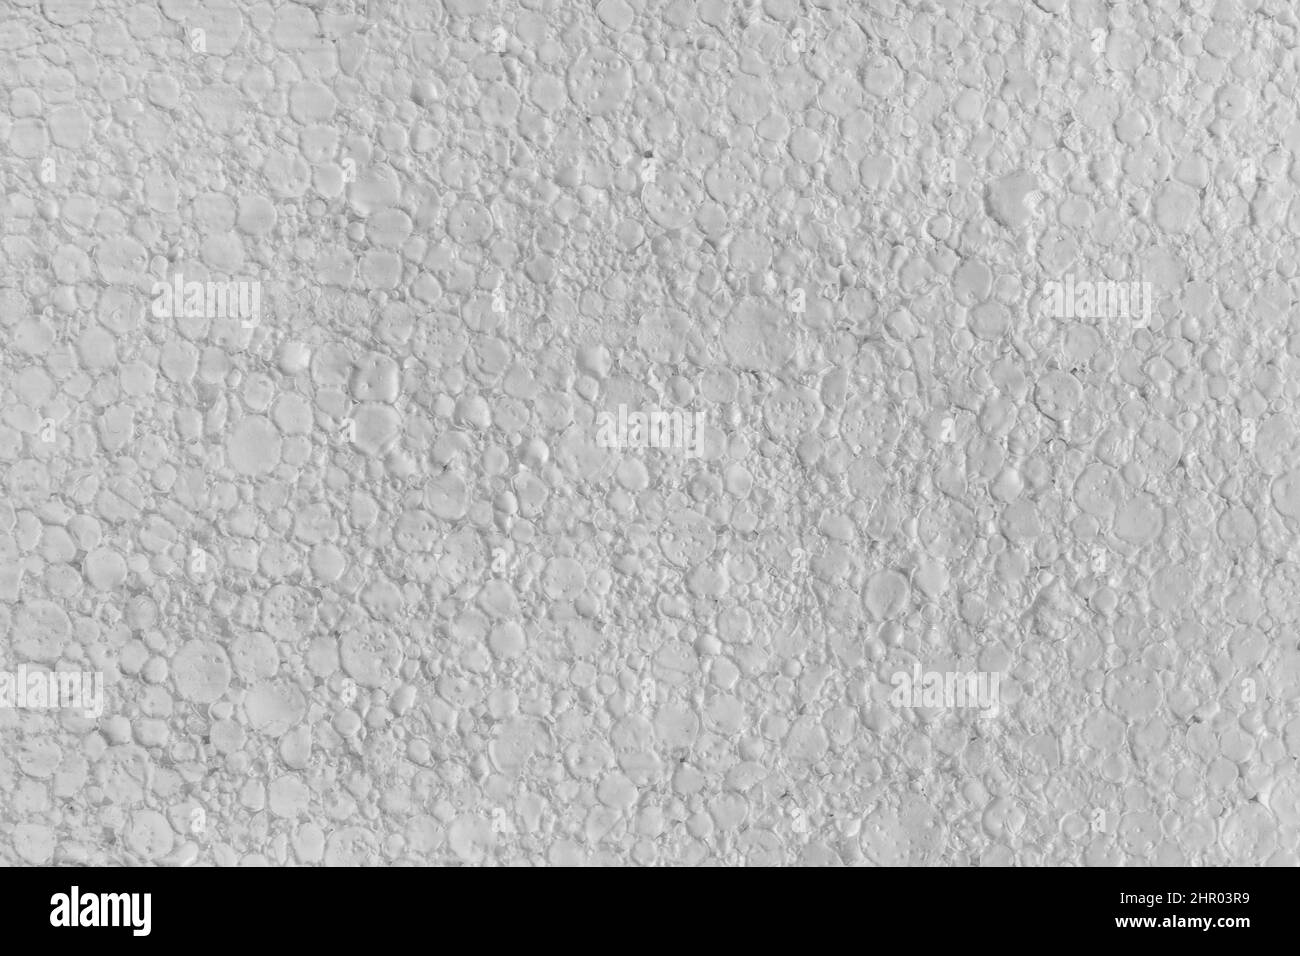 Styrofoam Polystyrene Plasterboard Drywall Foam Building Material Surface White Abstract Wall Texture Background. Stock Photo